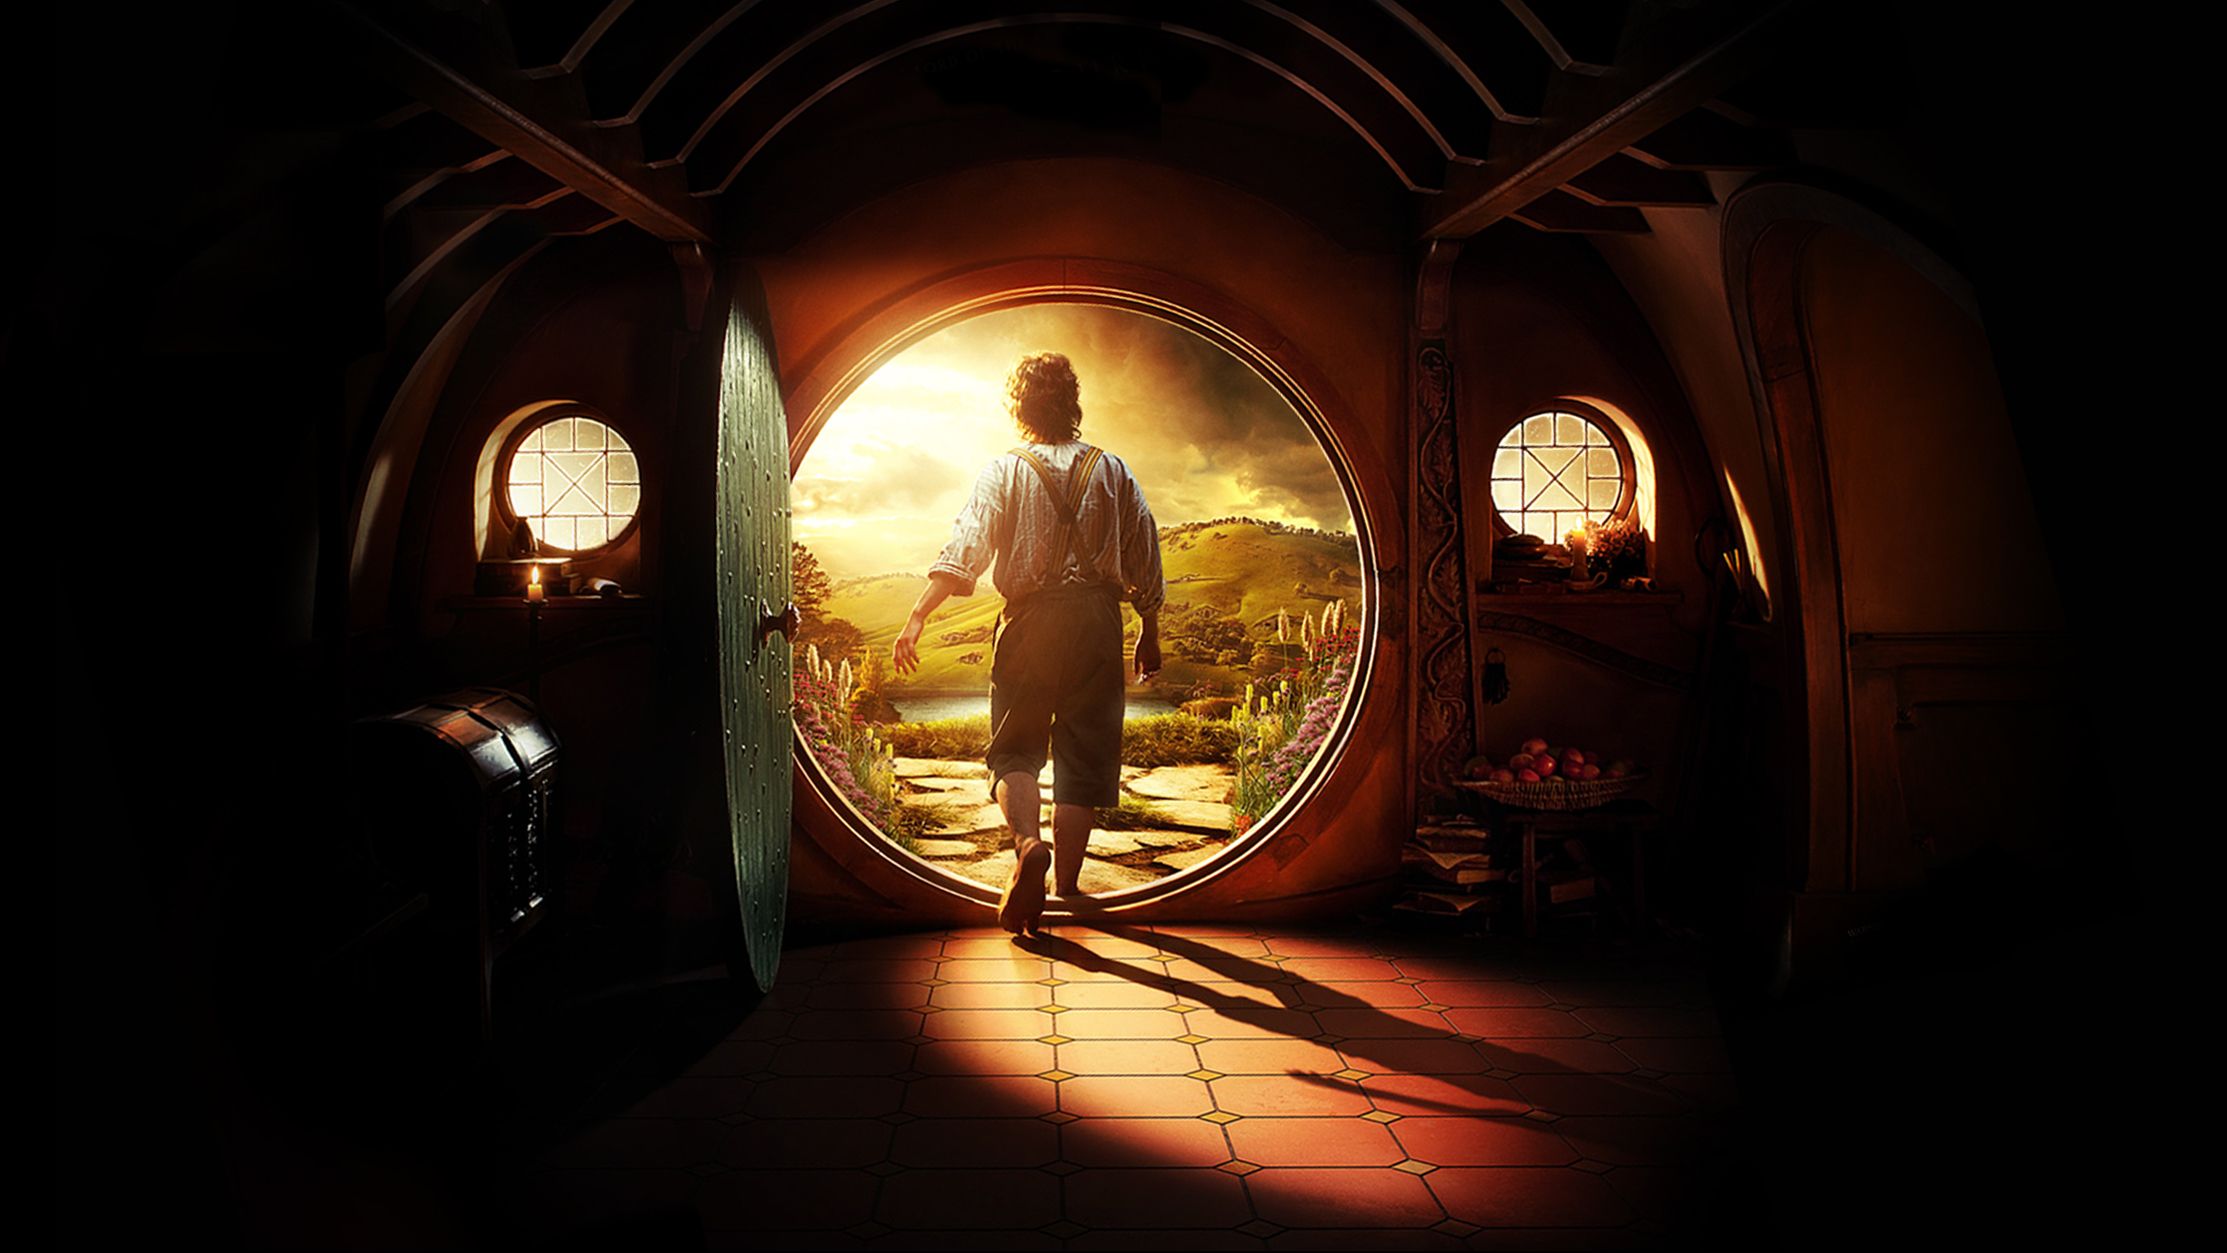 The Hobbit Movie Wallpapers Awesome Backgrounds